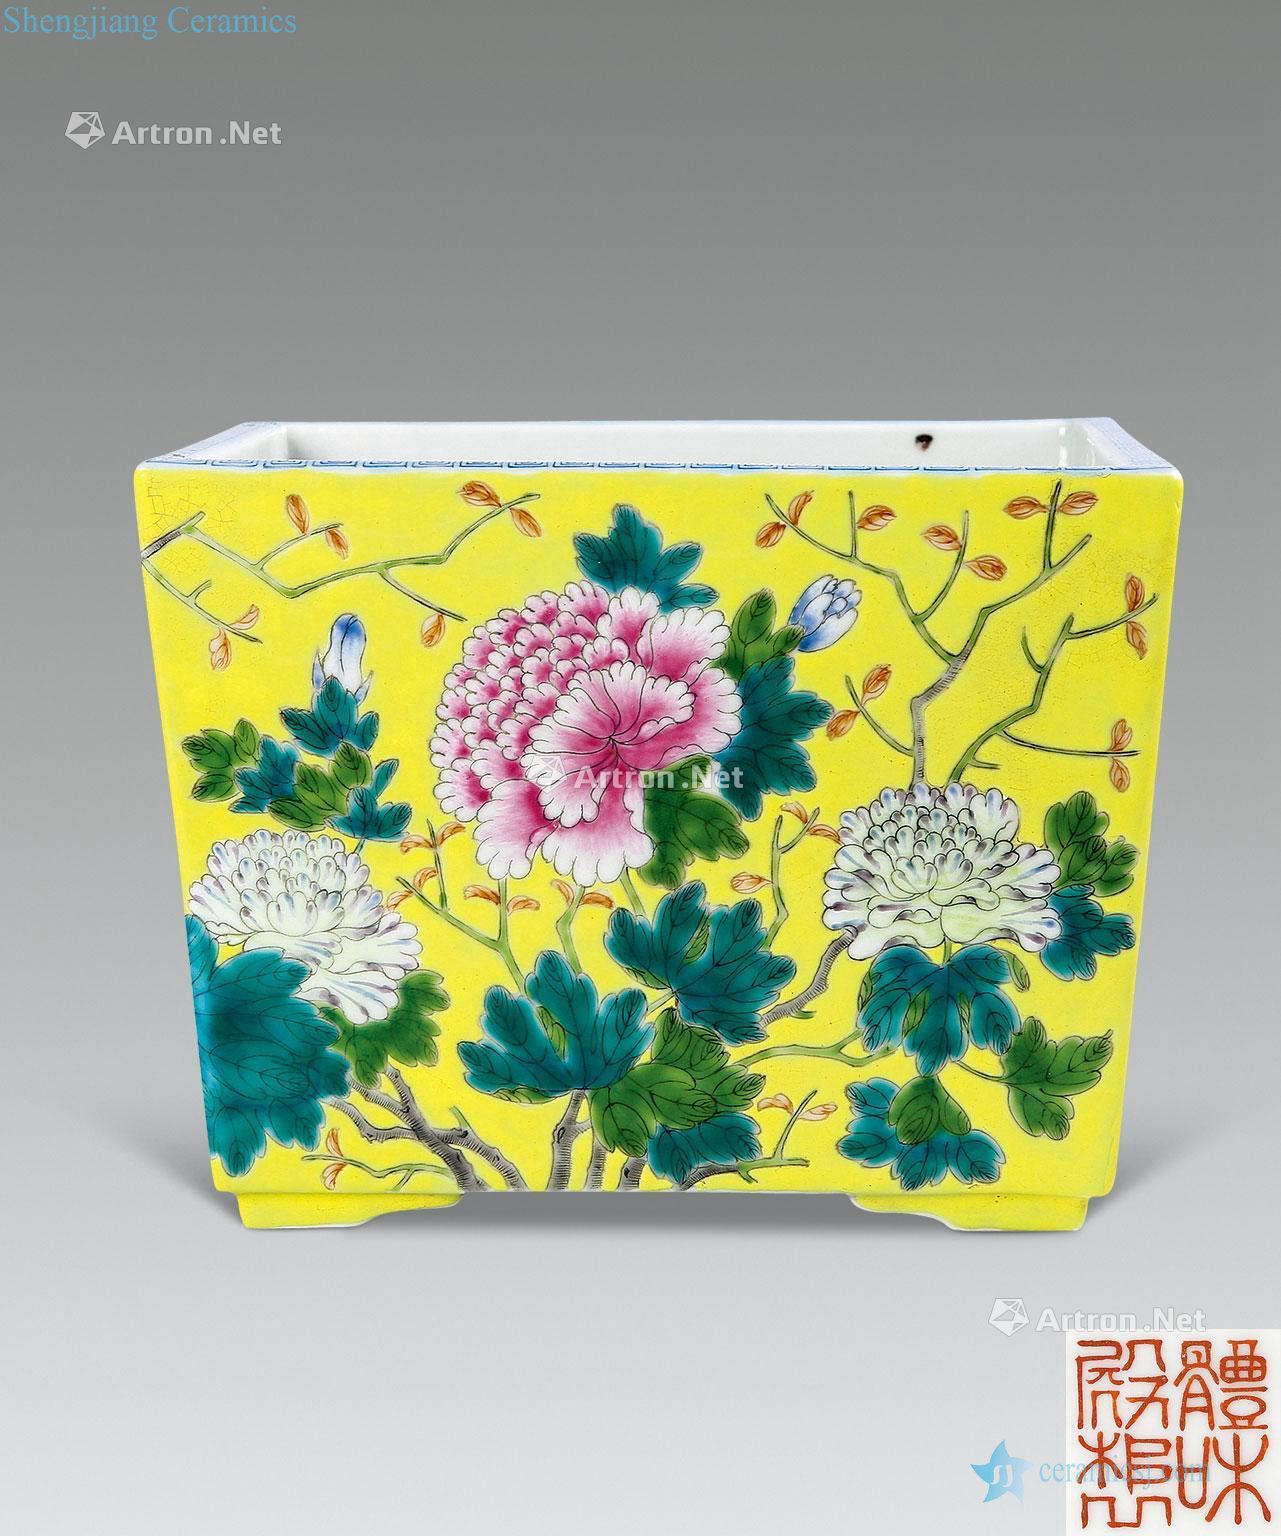 Qing body and temple square faceplate to pastel yellow flowers